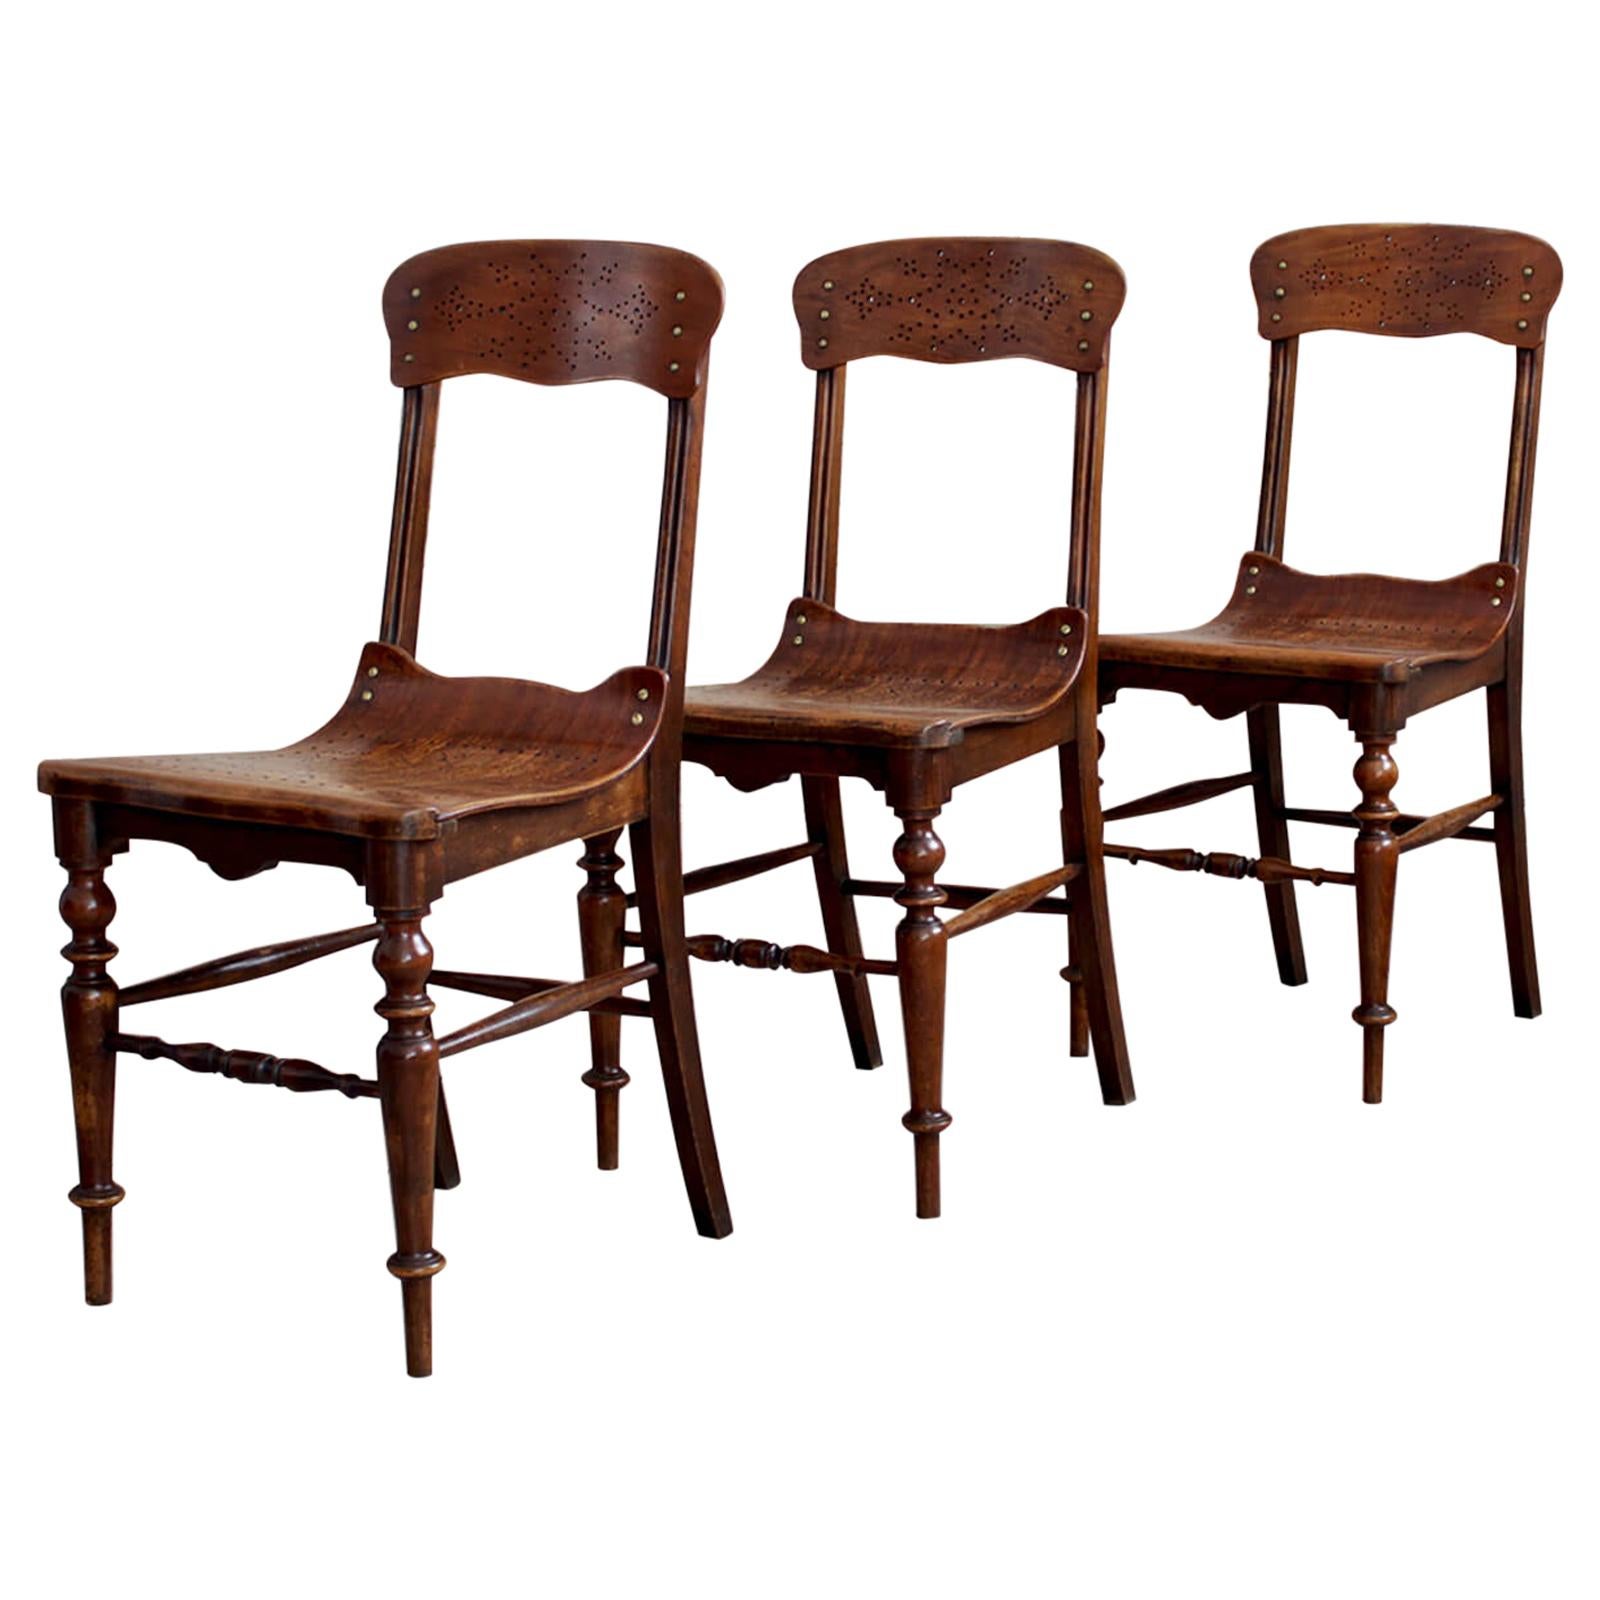 Set of 3 Chairs, Bent Plywood, Early 20th Century